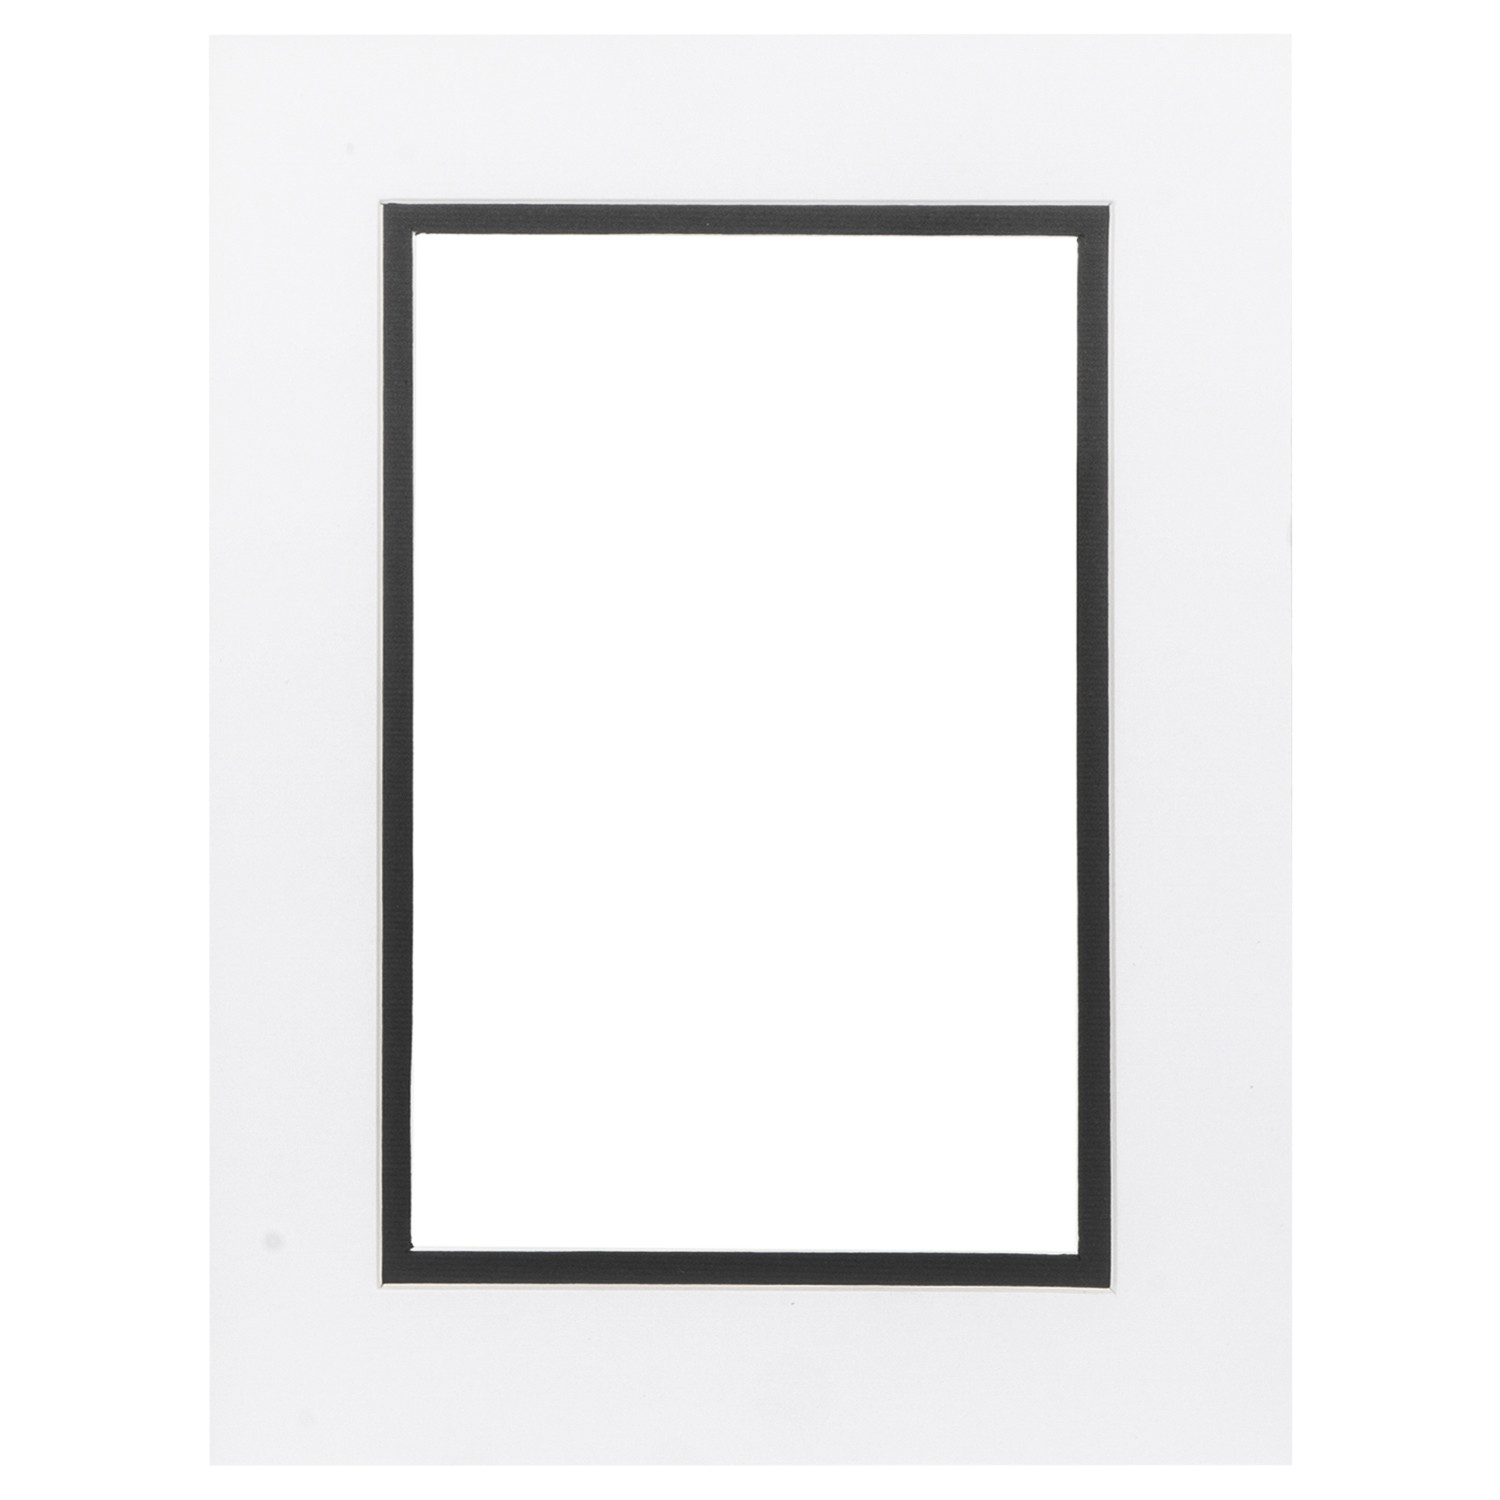 White and Black Double Picture Photo Frame Mount 6 x 4 inch Image